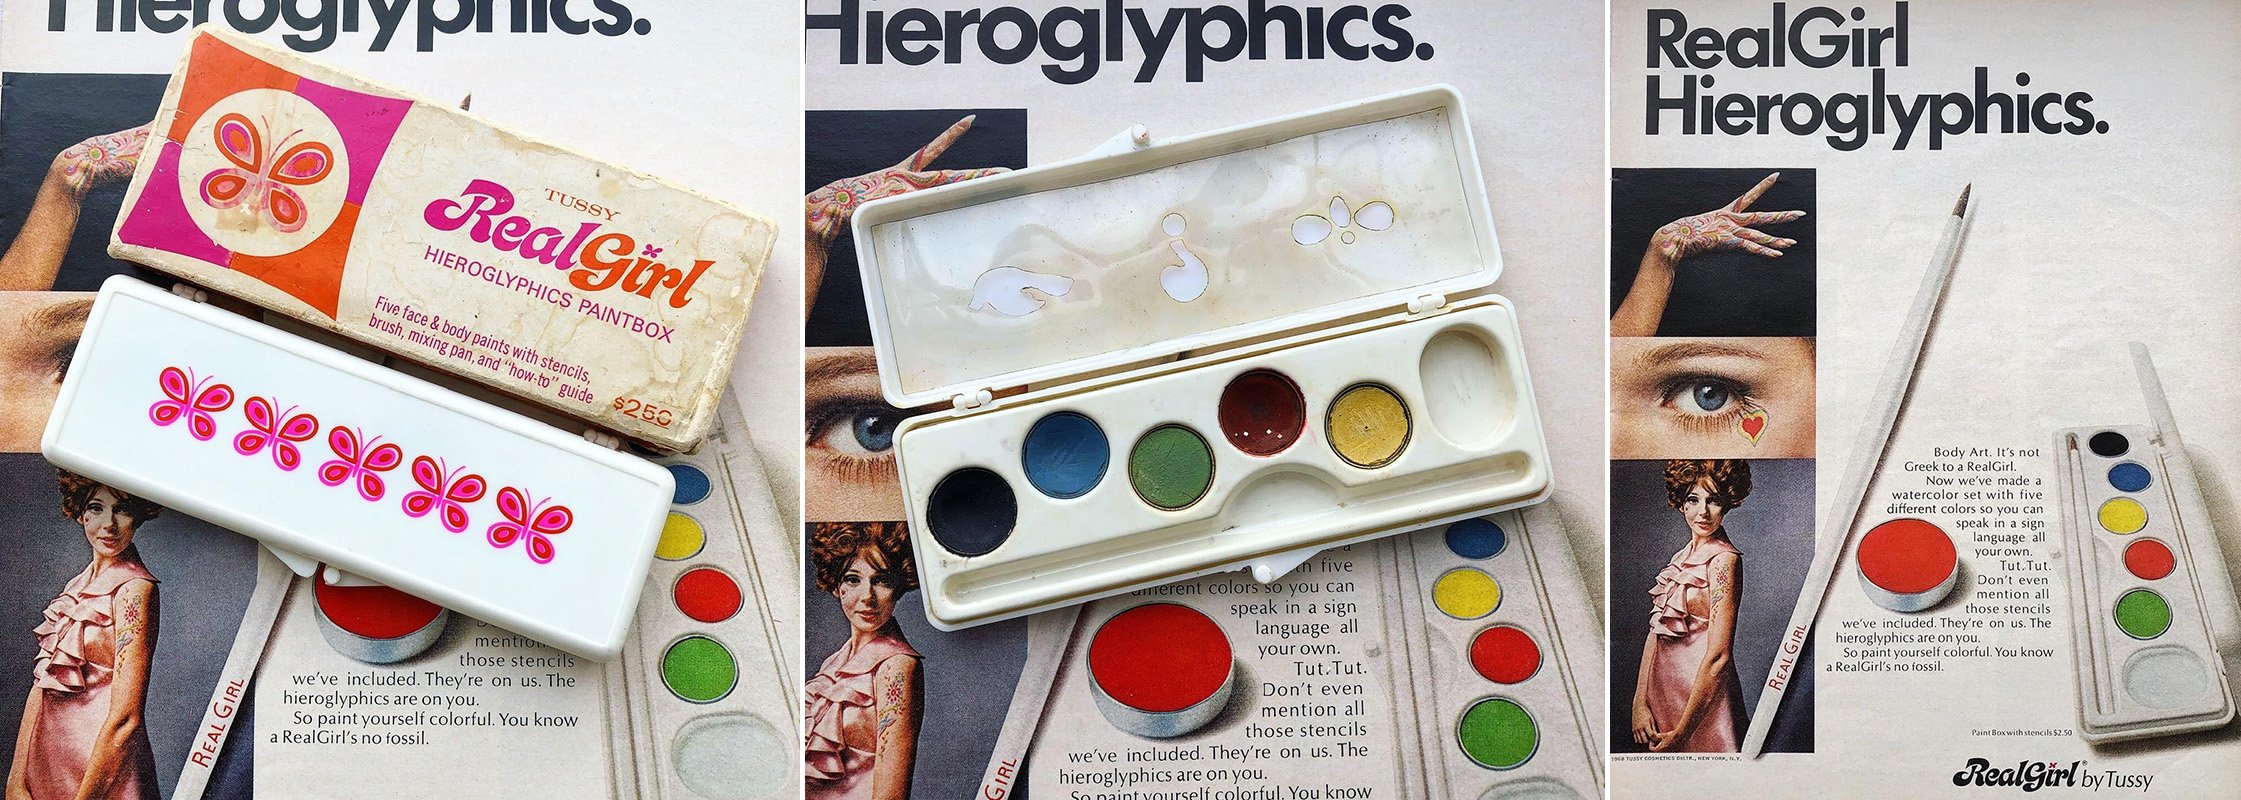   Real Girl Hieroglyphics Paint Kit and Advertisement Tussy, 1968   Wanting to capitalize on the body painting fad embraced by hippies, in the summer of 1968 Tussy released a makeup kit containing 5 colors, brush, stencils and a how-to guide. It’s un